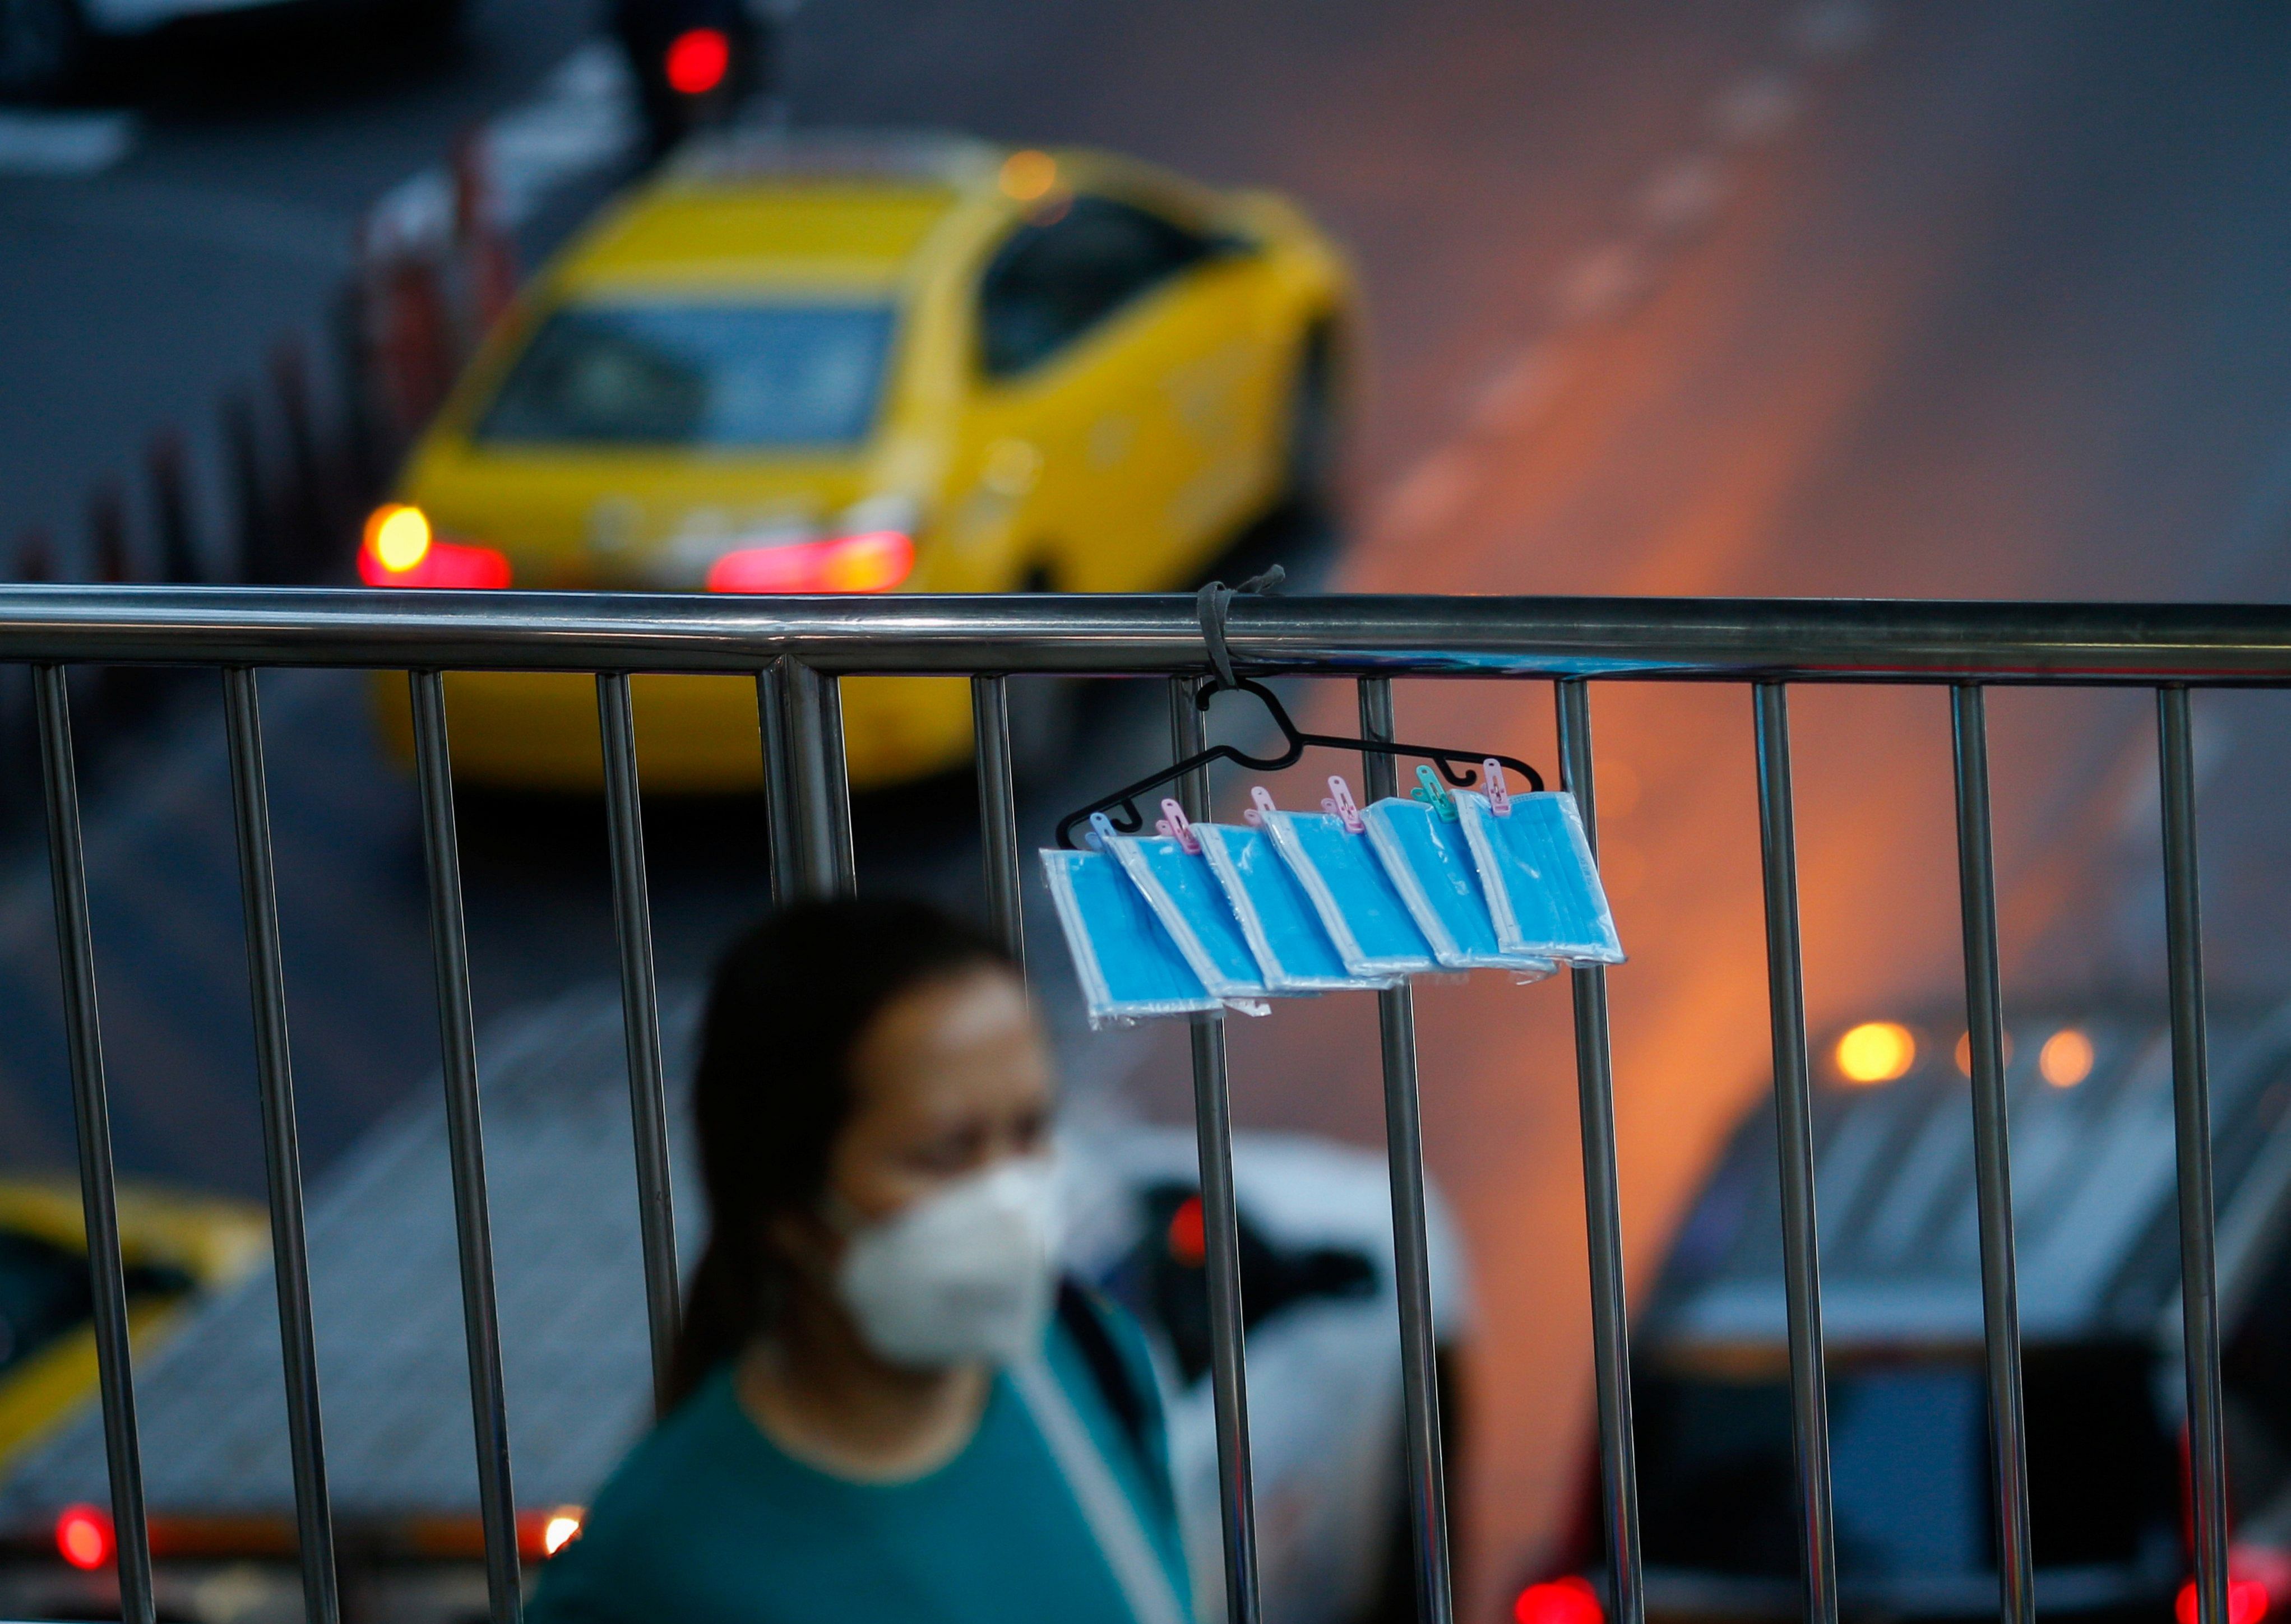 Protective face masks sold by a vendor are seen hanging on a fence following the coronavirus disease (COVID-19) outbreak in Bangkok, Thailand. (Credit: Reuters)